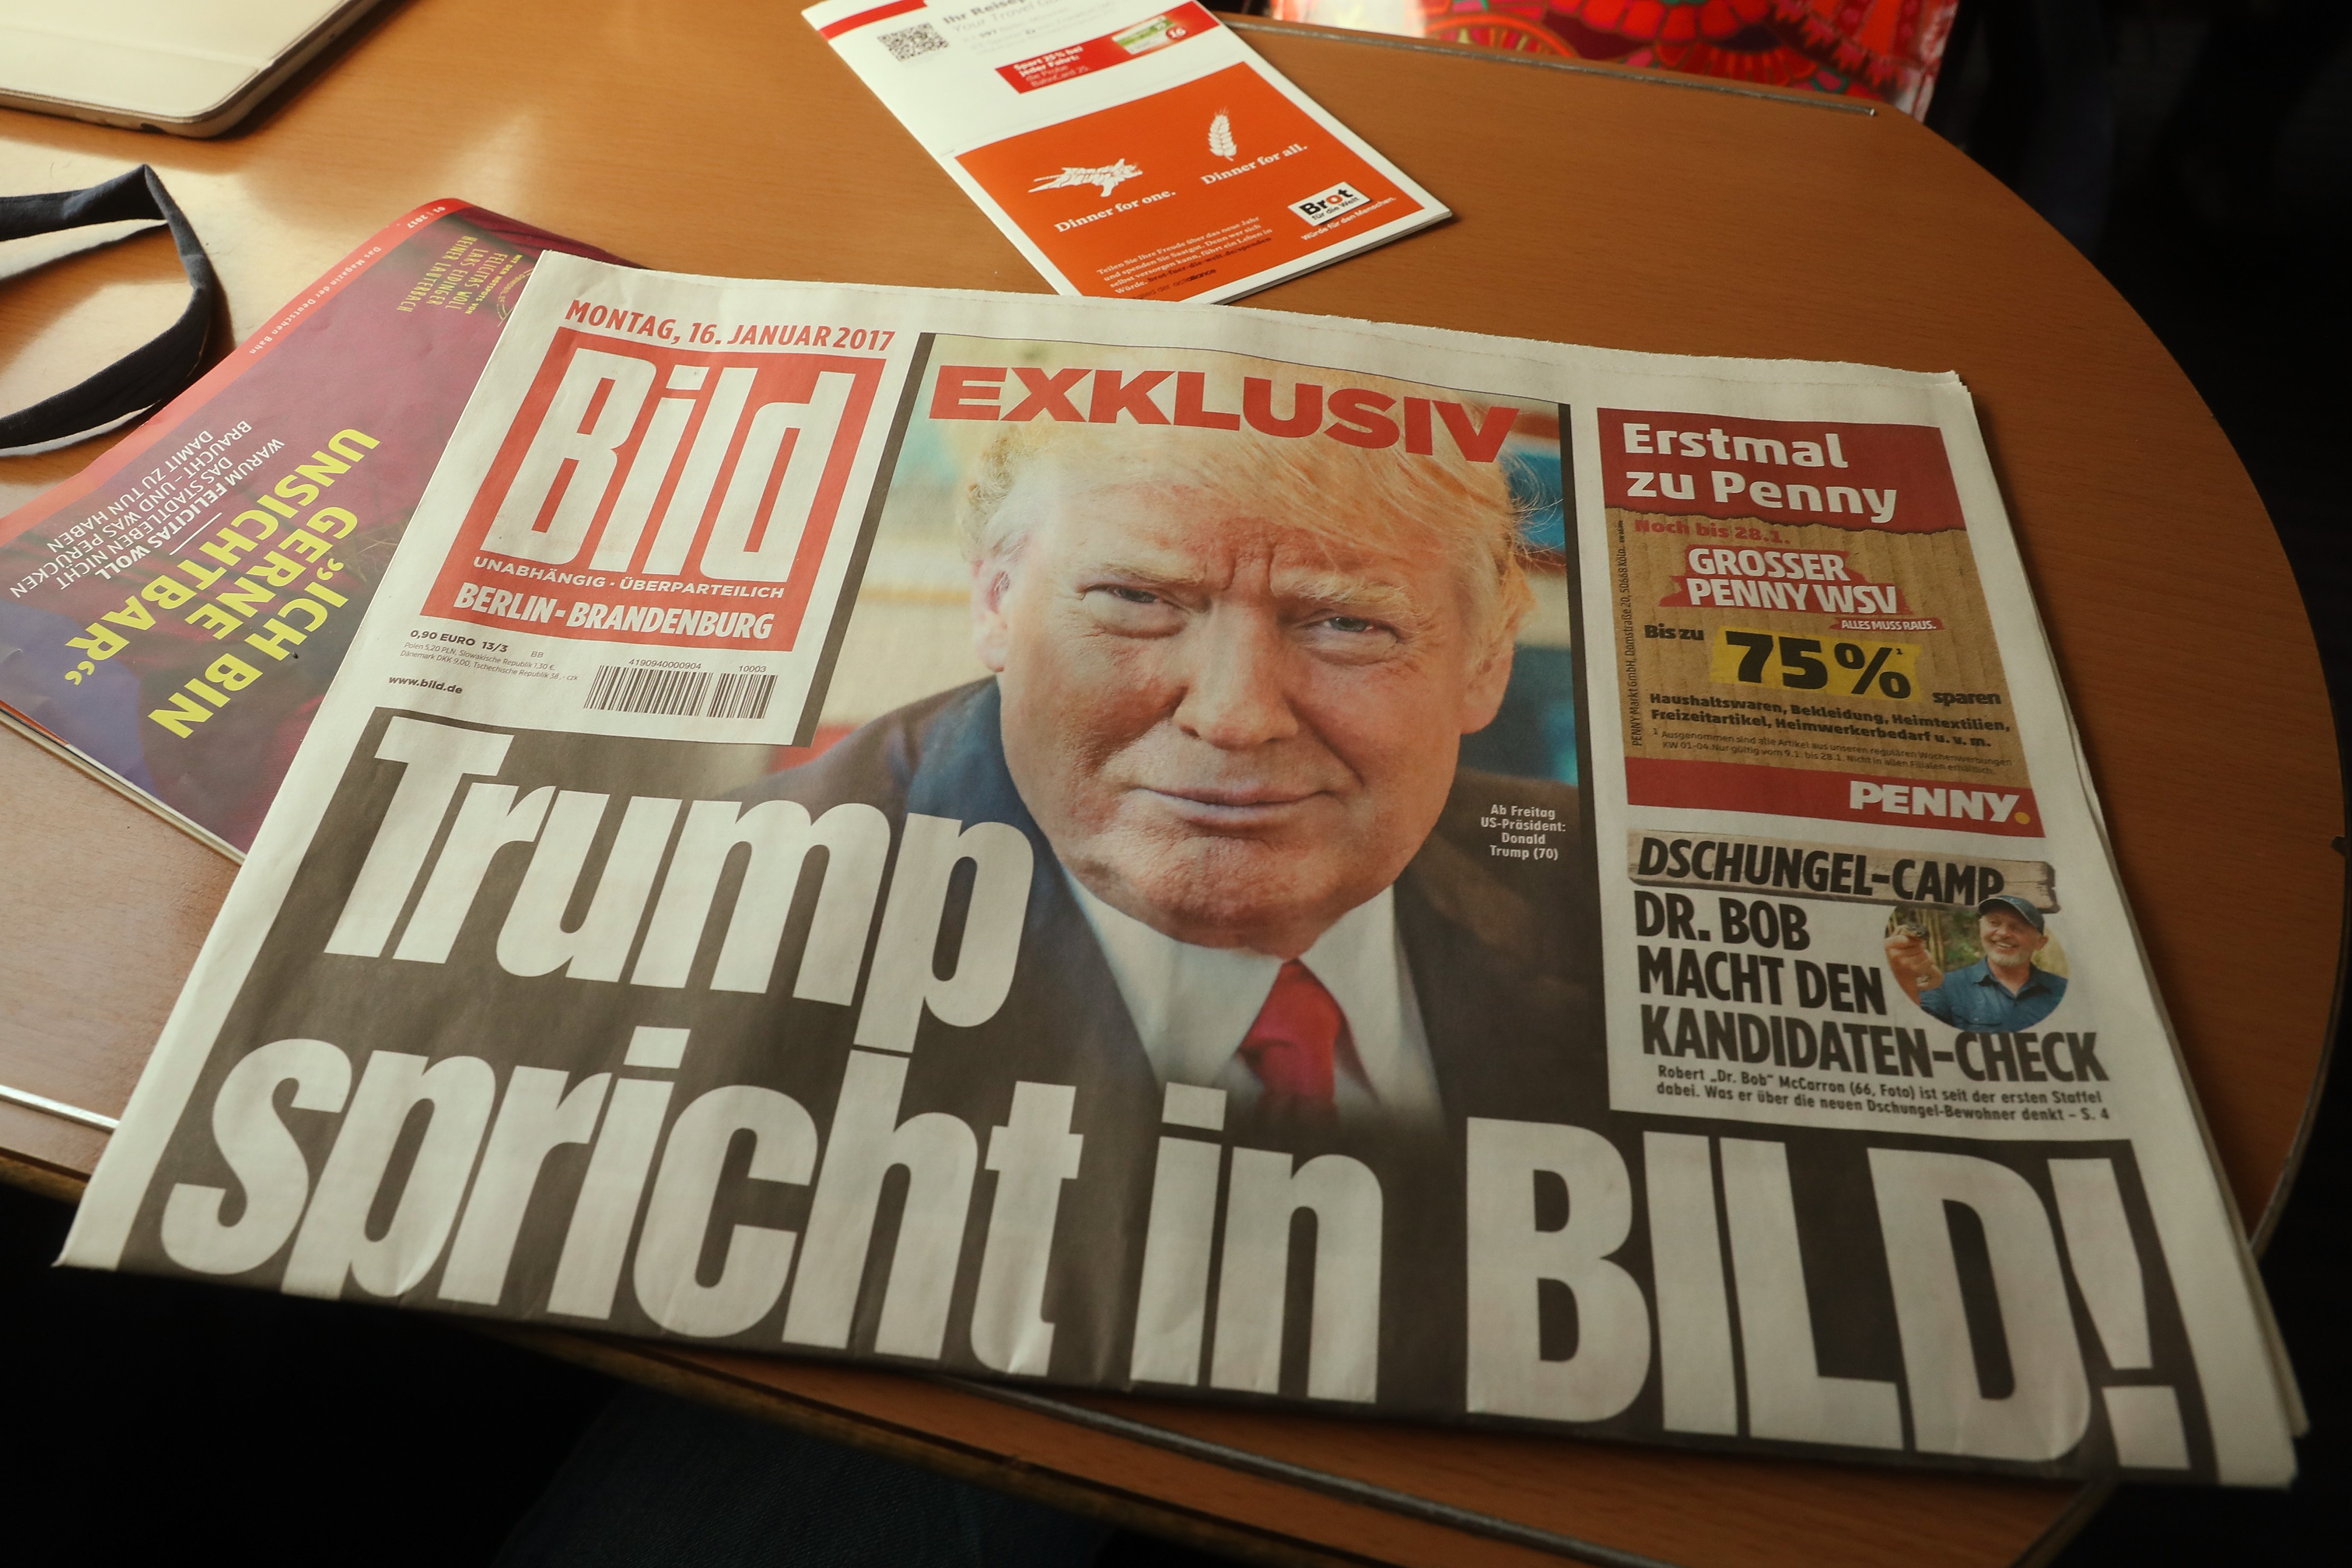 A copy of the January 16 issue of German tabloid Bild Zeitung that features an exclusive interview with U.S. President-elect Donald Trump lies on a table in a train in Berlin, Germany on Jan. 16, 2017. (Sean Gallup—Getty Images)